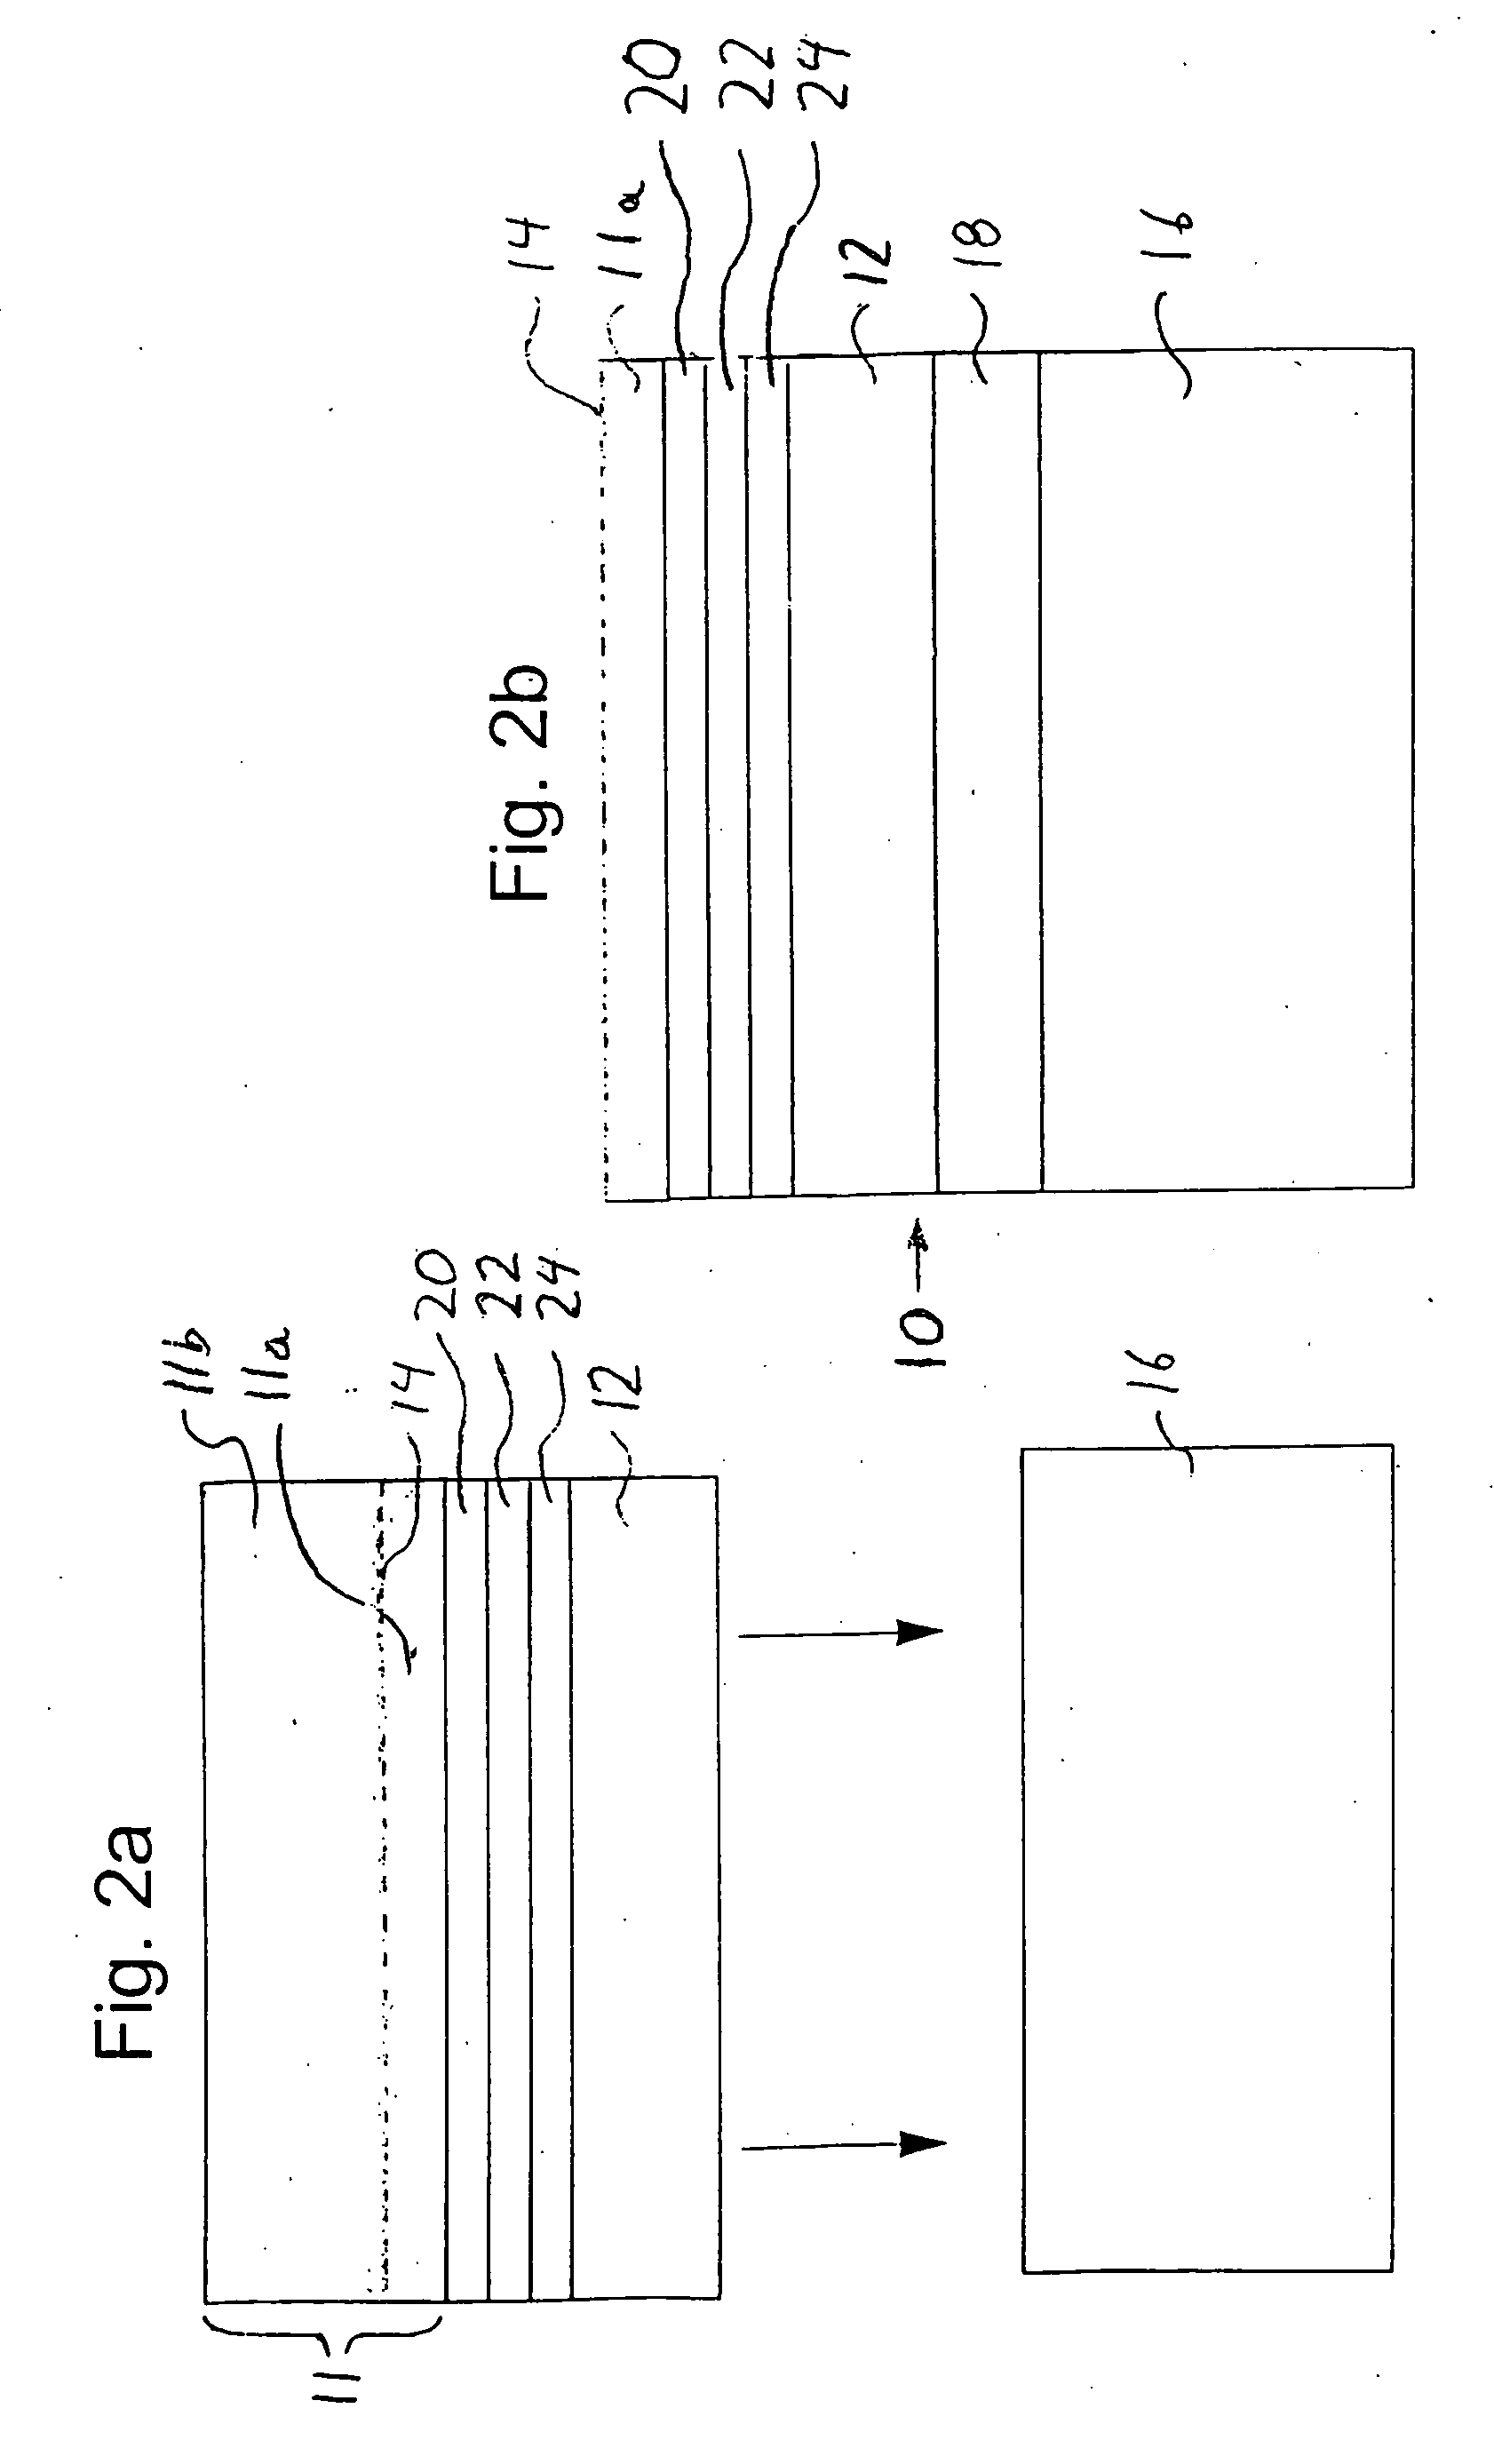 Method for transferring thin film layer material to a flexible substrate using a hydrogen ion splitting technique